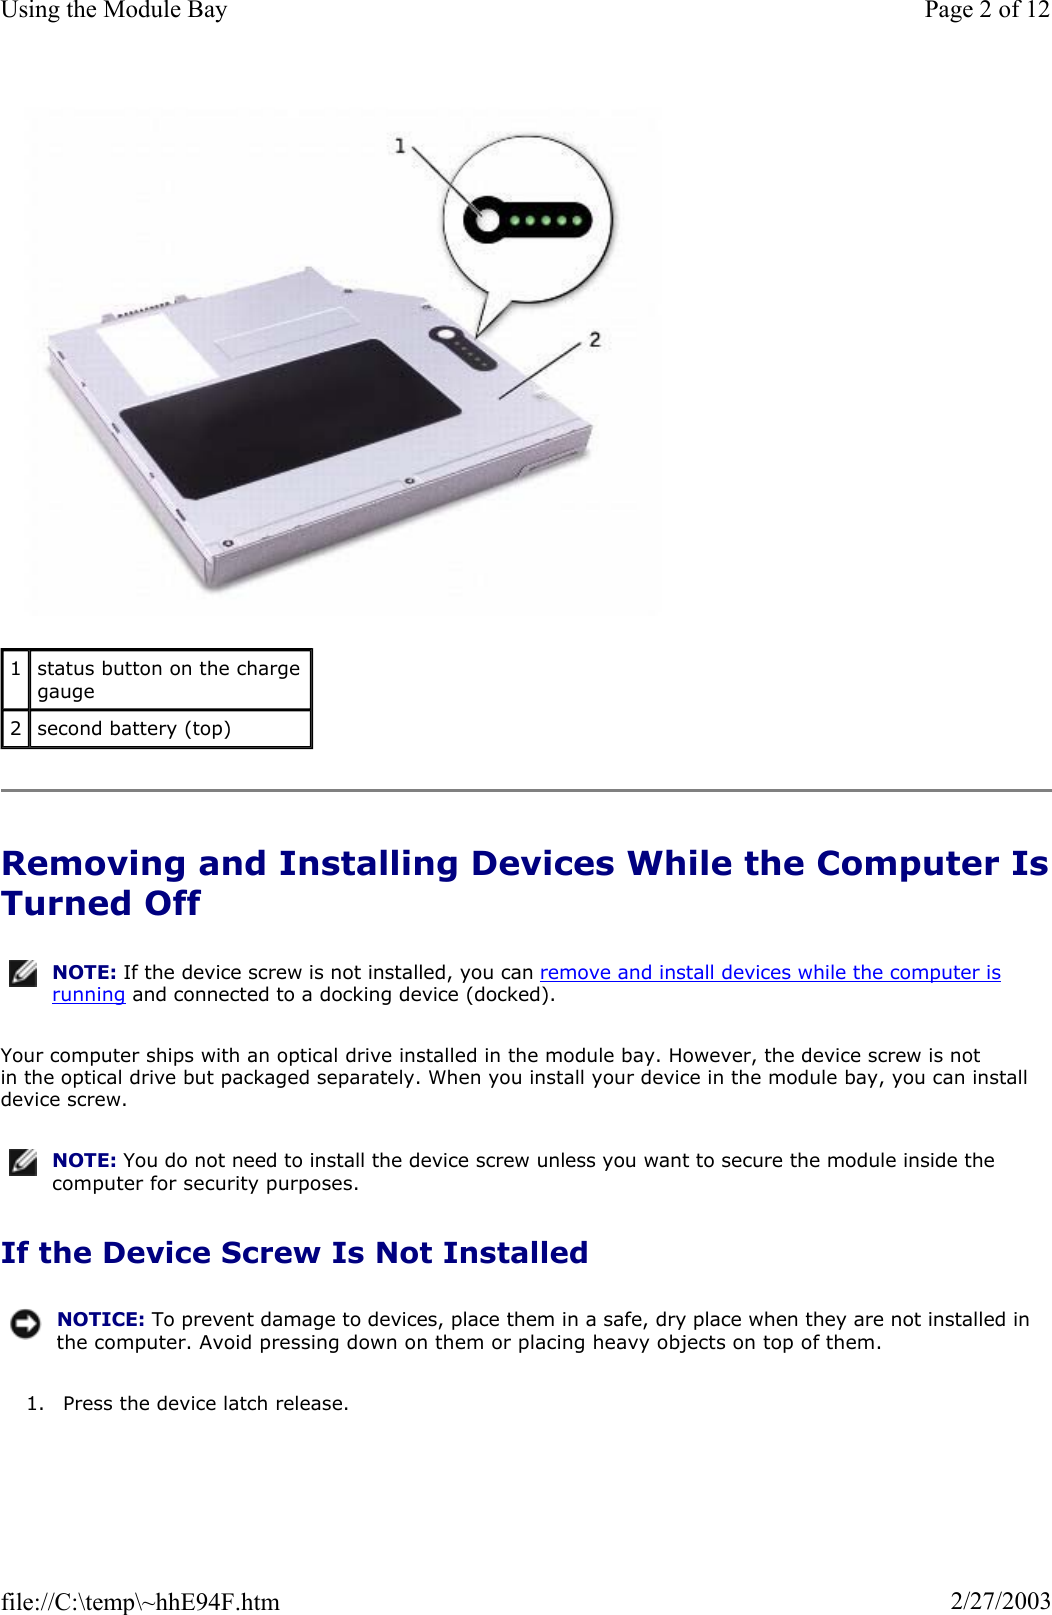 Removing and Installing Devices While the Computer IsTurned Off Your computer ships with an optical drive installed in the module bay. However, the device screw is not in the optical drive but packaged separately. When you install your device in the module bay, you can install device screw. If the Device Screw Is Not Installed 1. Press the device latch release. 1status button on the charge gauge 2second battery (top) NOTE: If the device screw is not installed, you can remove and install devices while the computer is running and connected to a docking device (docked).NOTE: You do not need to install the device screw unless you want to secure the module inside the computer for security purposes.NOTICE: To prevent damage to devices, place them in a safe, dry place when they are not installed in the computer. Avoid pressing down on them or placing heavy objects on top of them.Page 2 of 12Using the Module Bay2/27/2003file://C:\temp\~hhE94F.htm